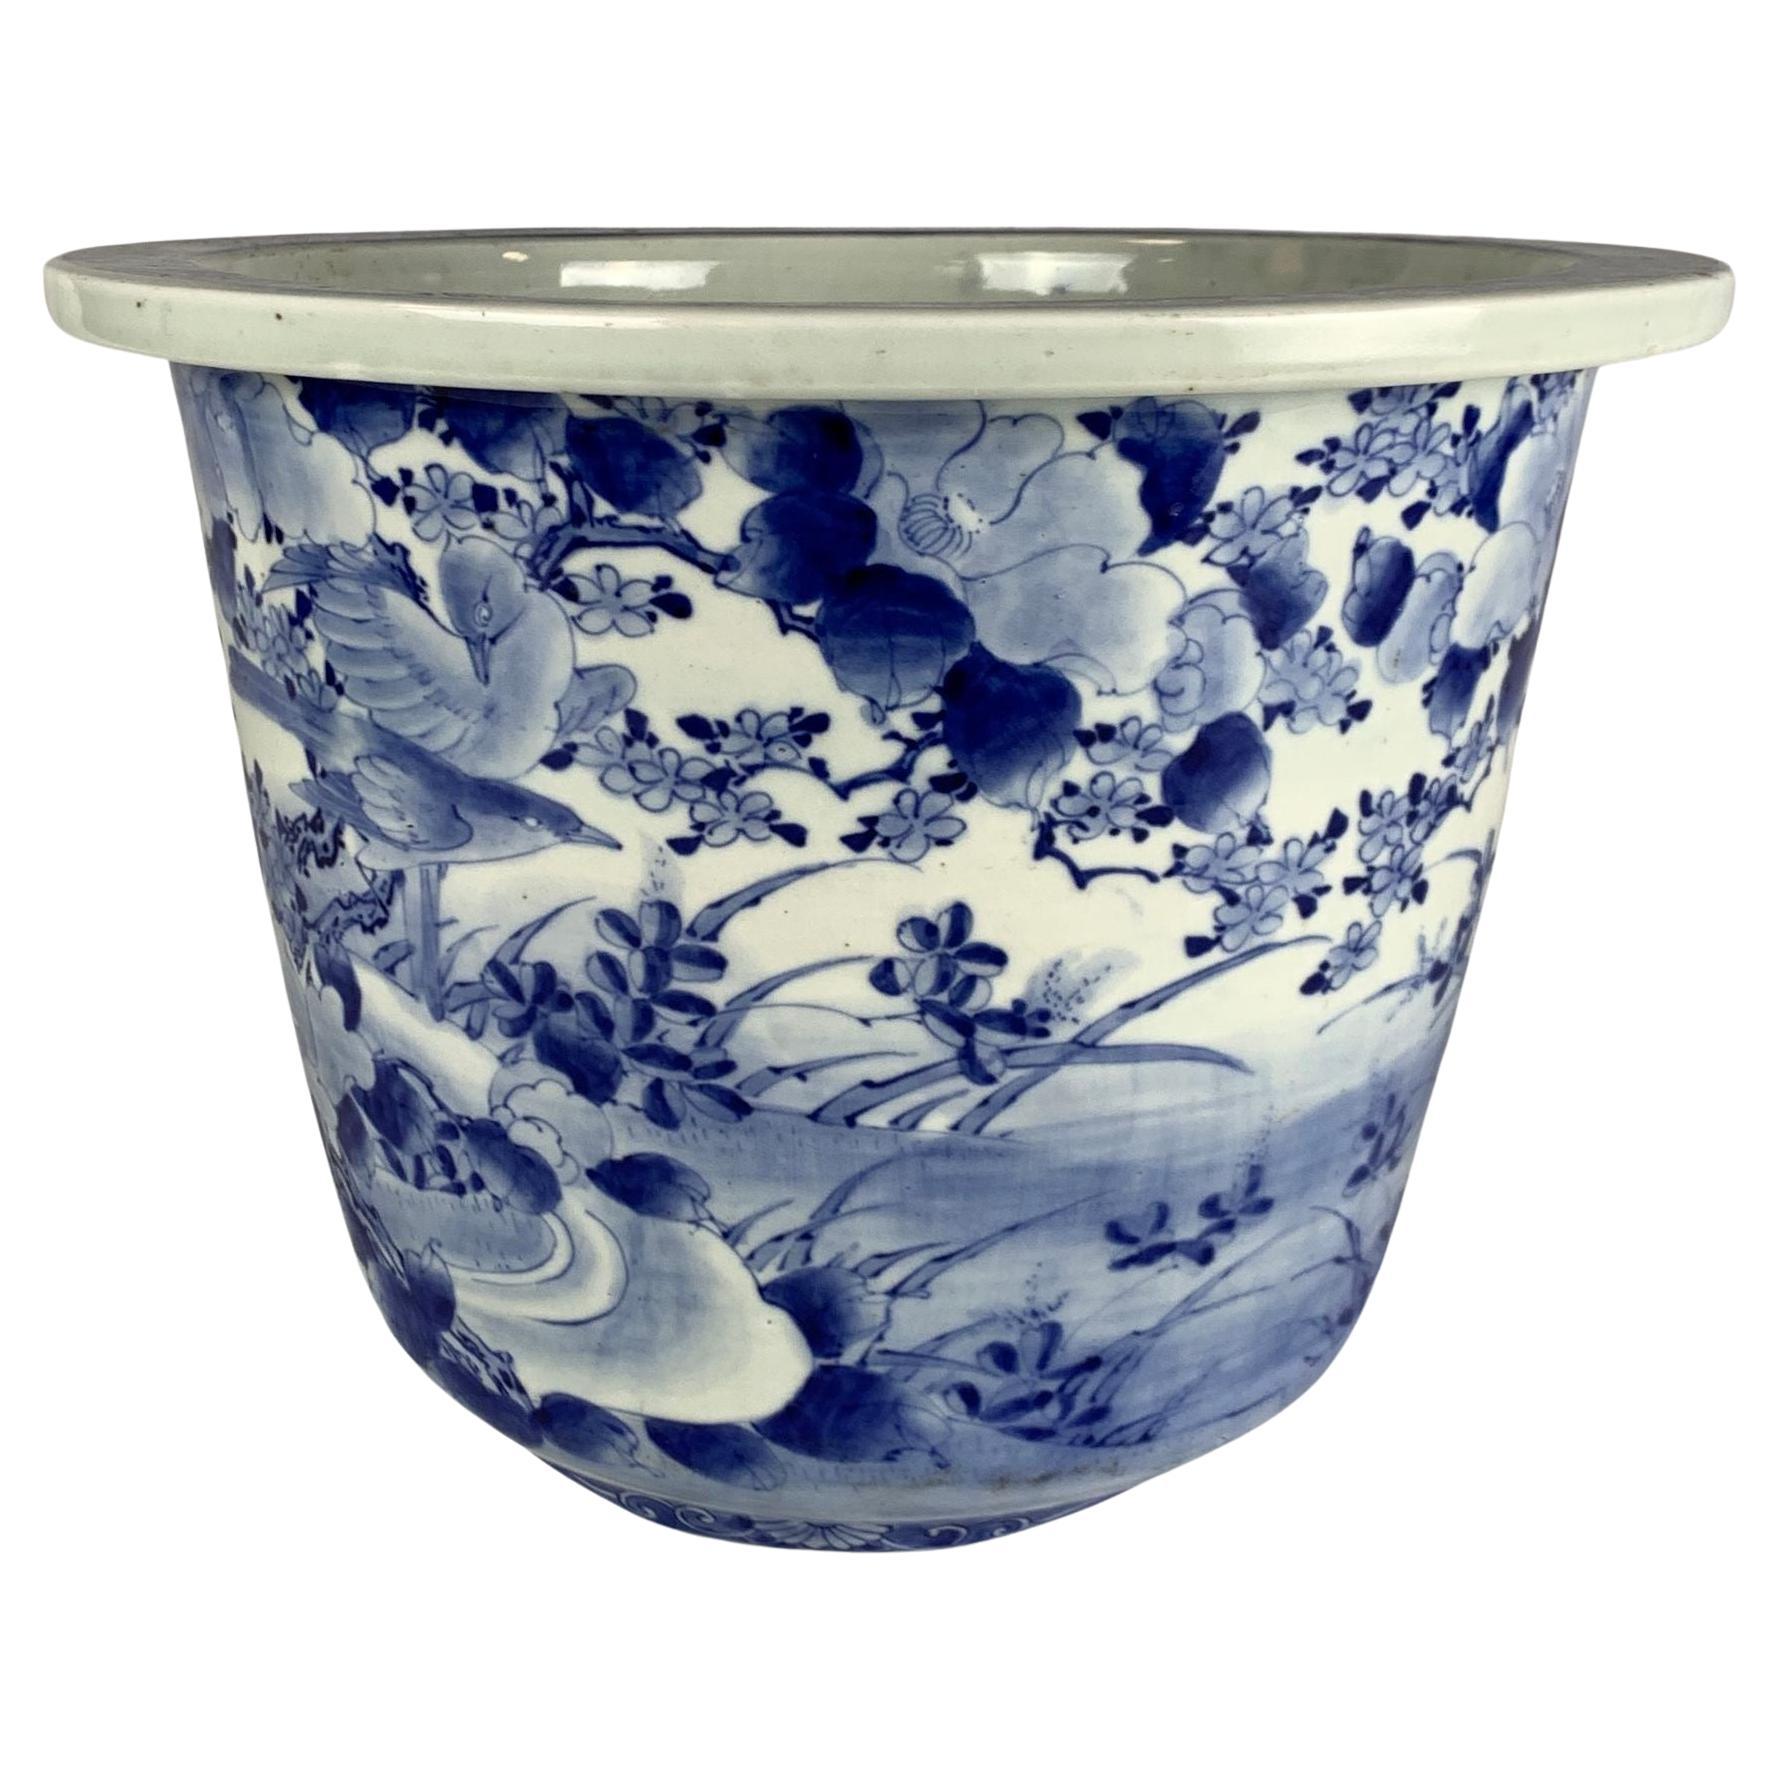 A Large Early 20th Century Japanese Porcelain Jardiniere For Sale